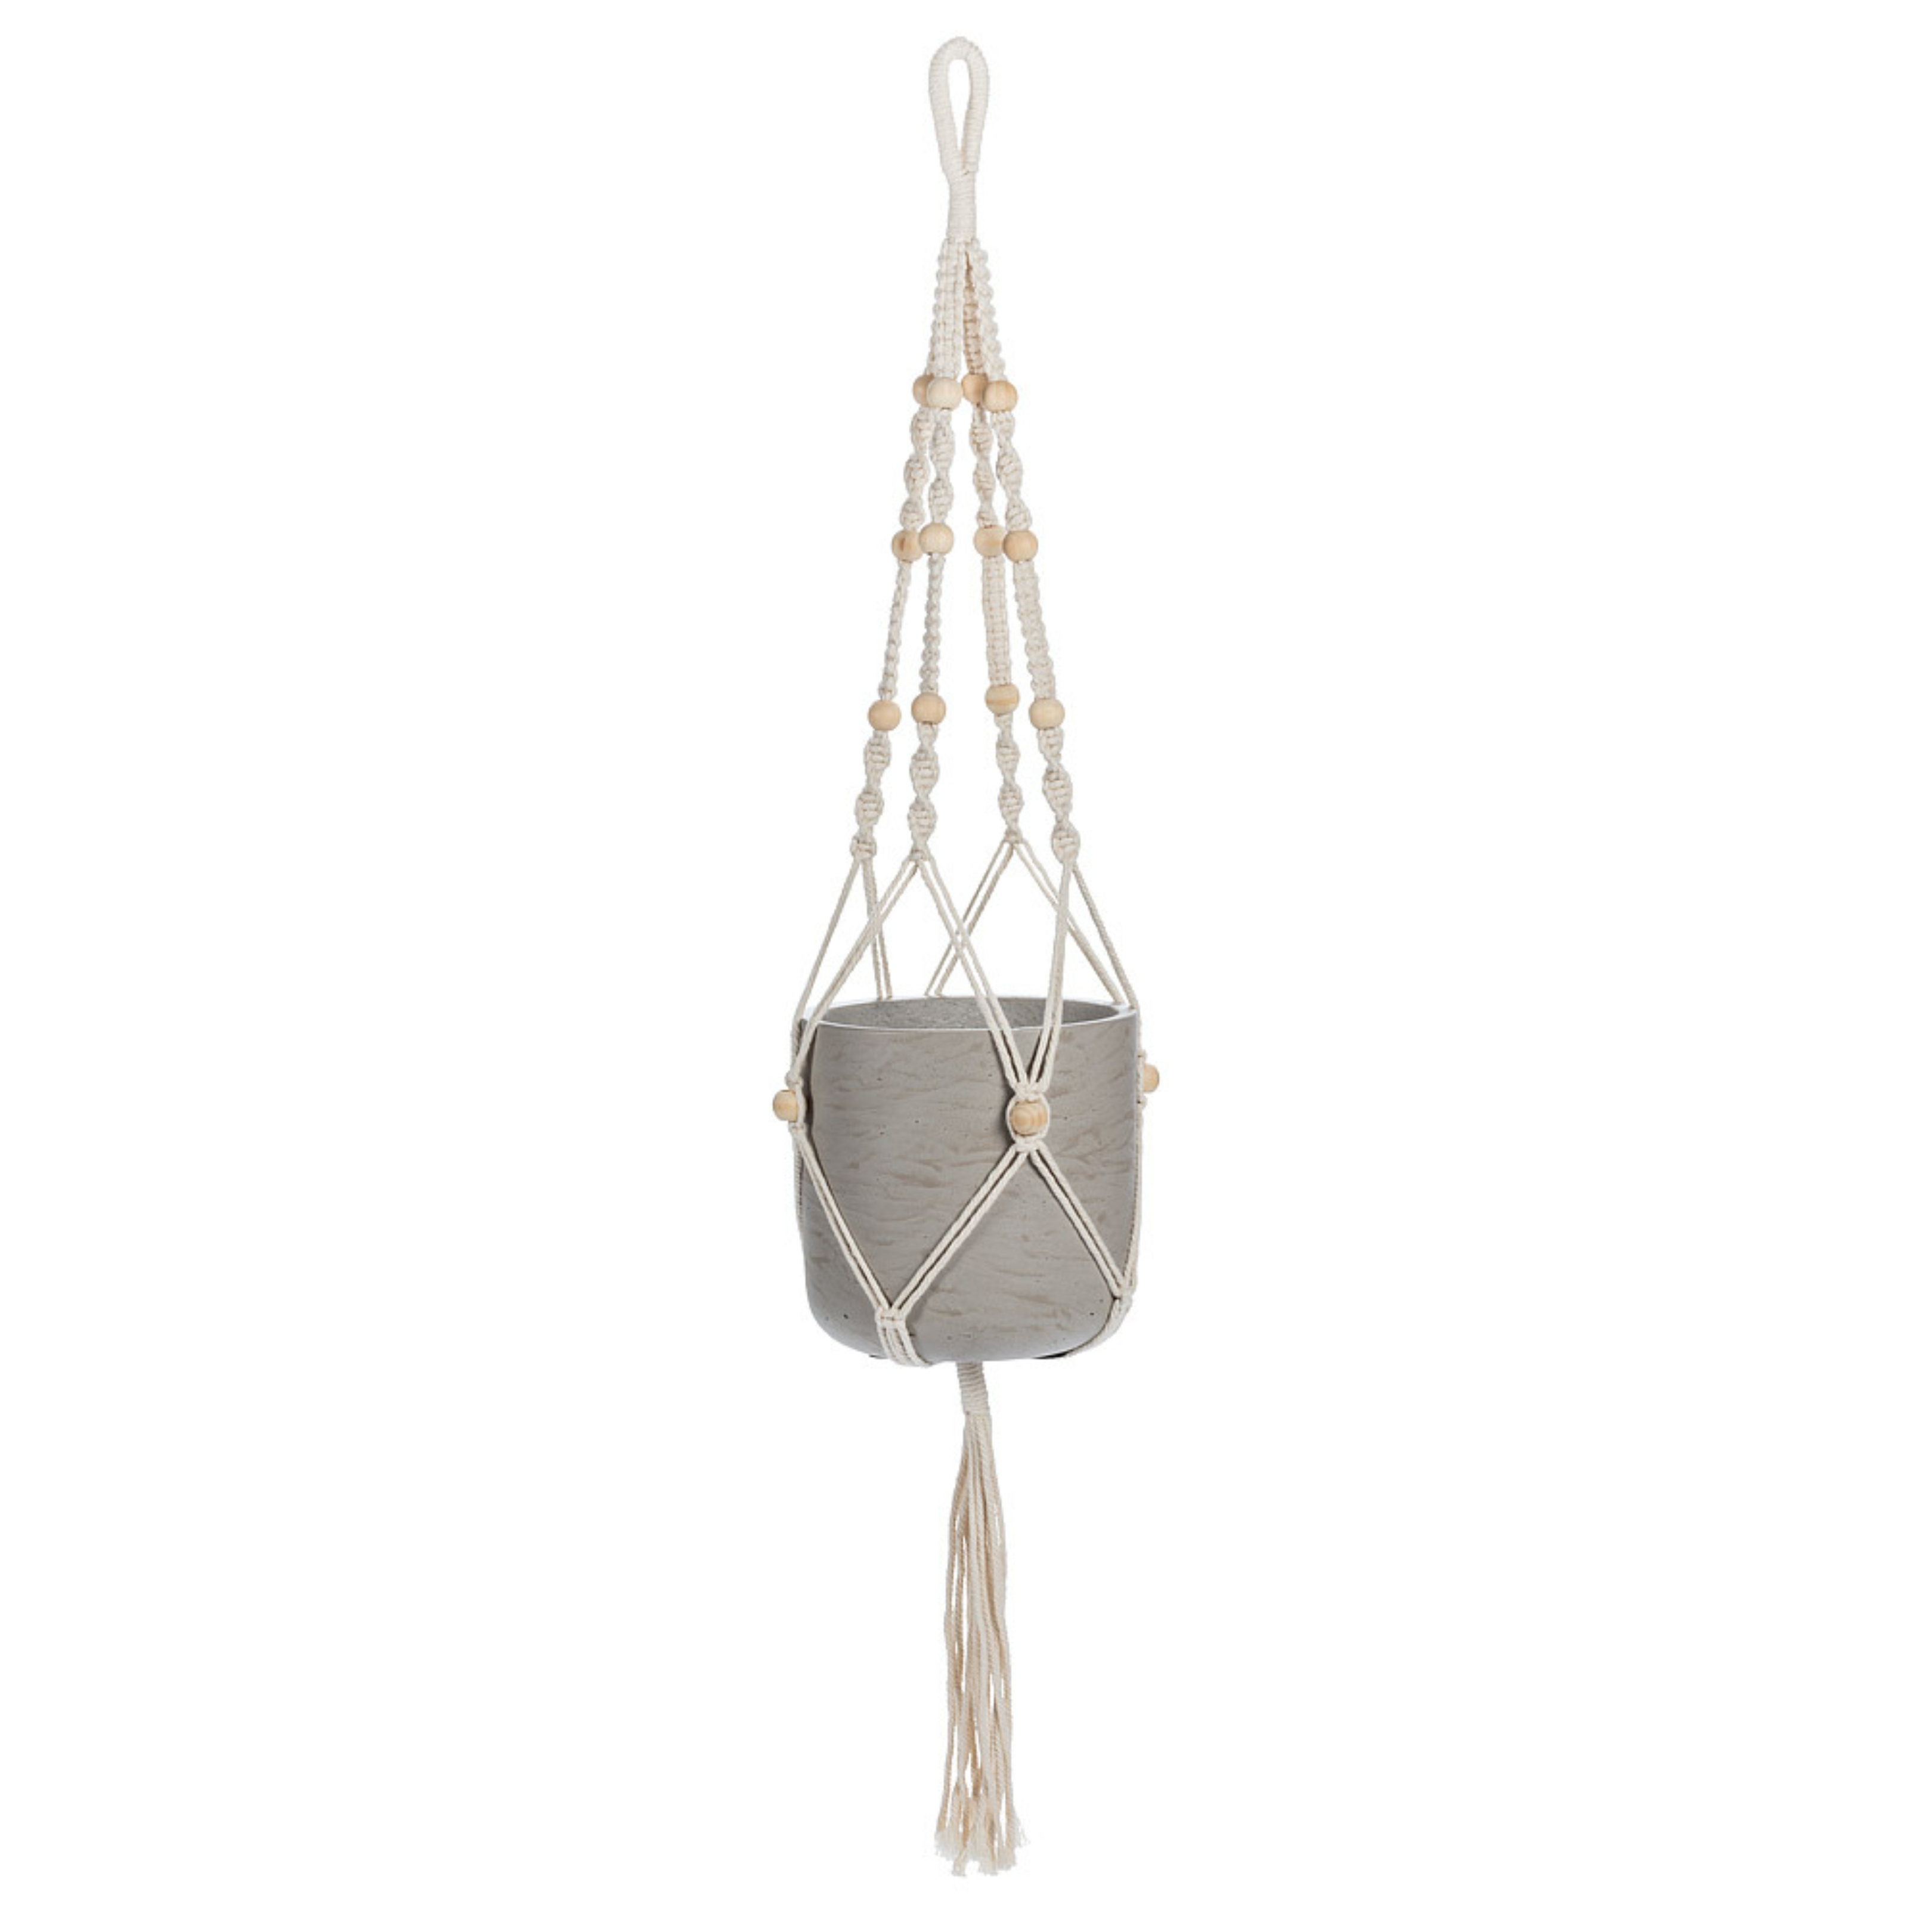 Macrame Plant Hanger Tail With Beads - 903